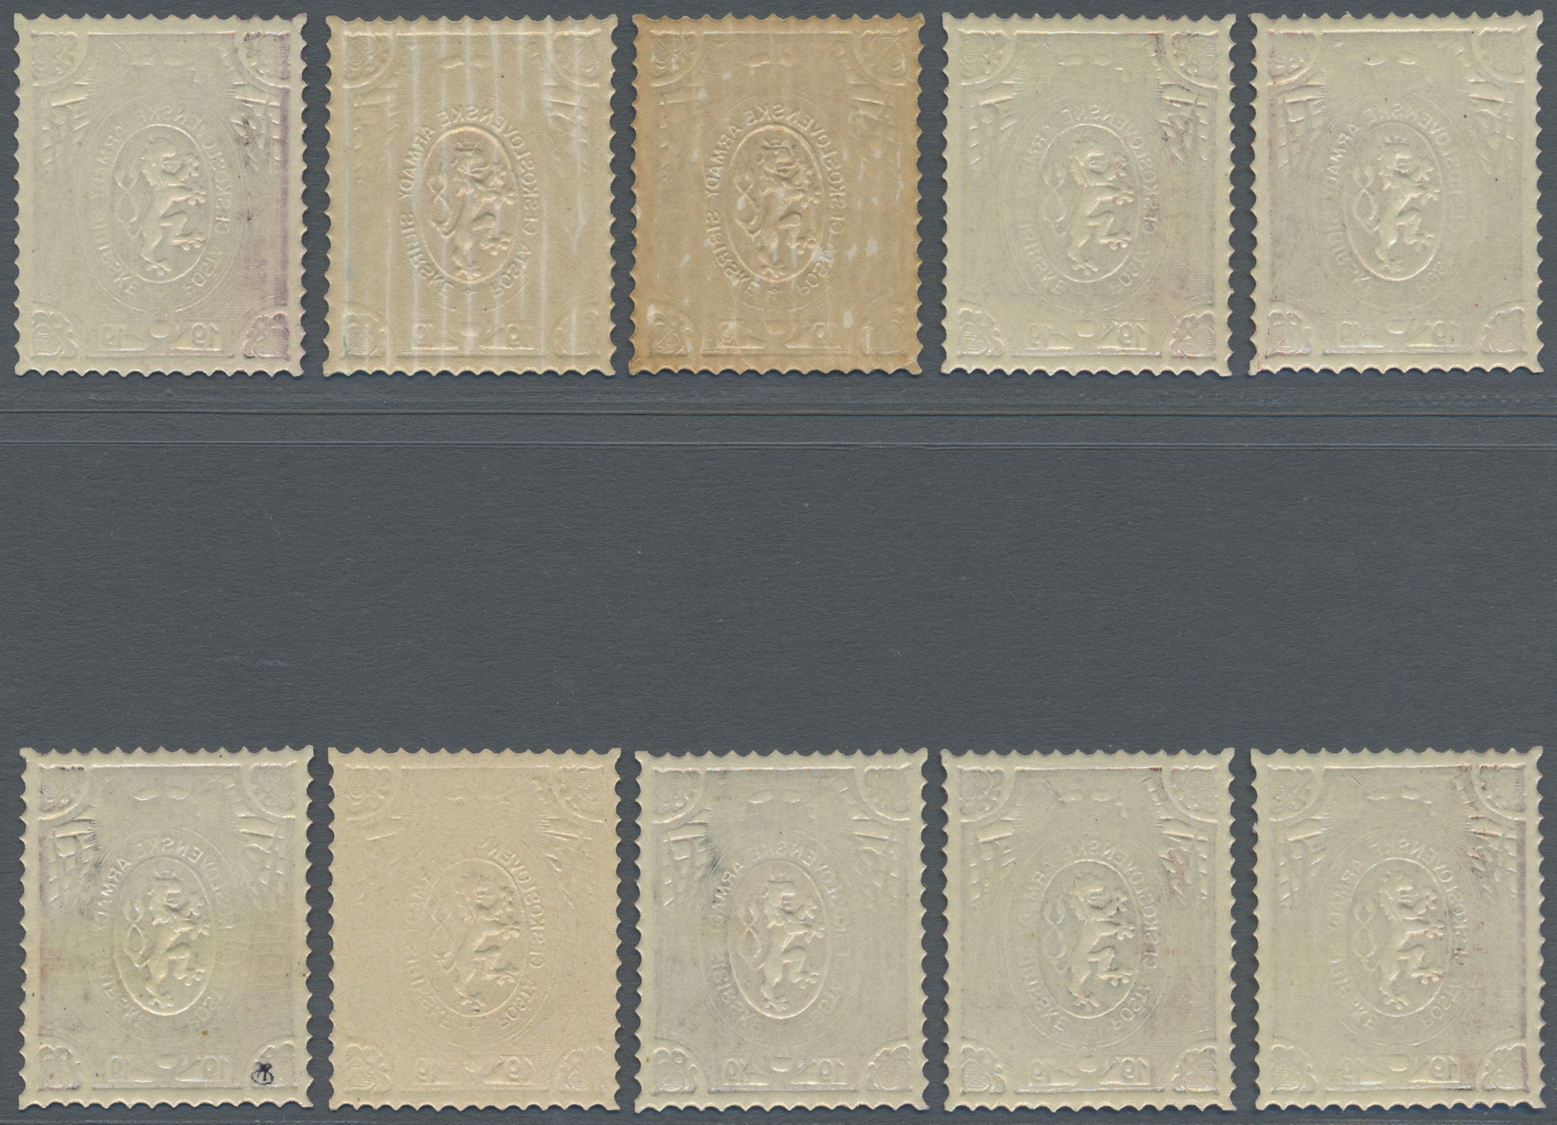 ** Tschechoslowakei - Militärpost Sibirien: 1919/1920, 12 Proofs In Different Colours For The 1 R Issue For Czech - Siberian Legion